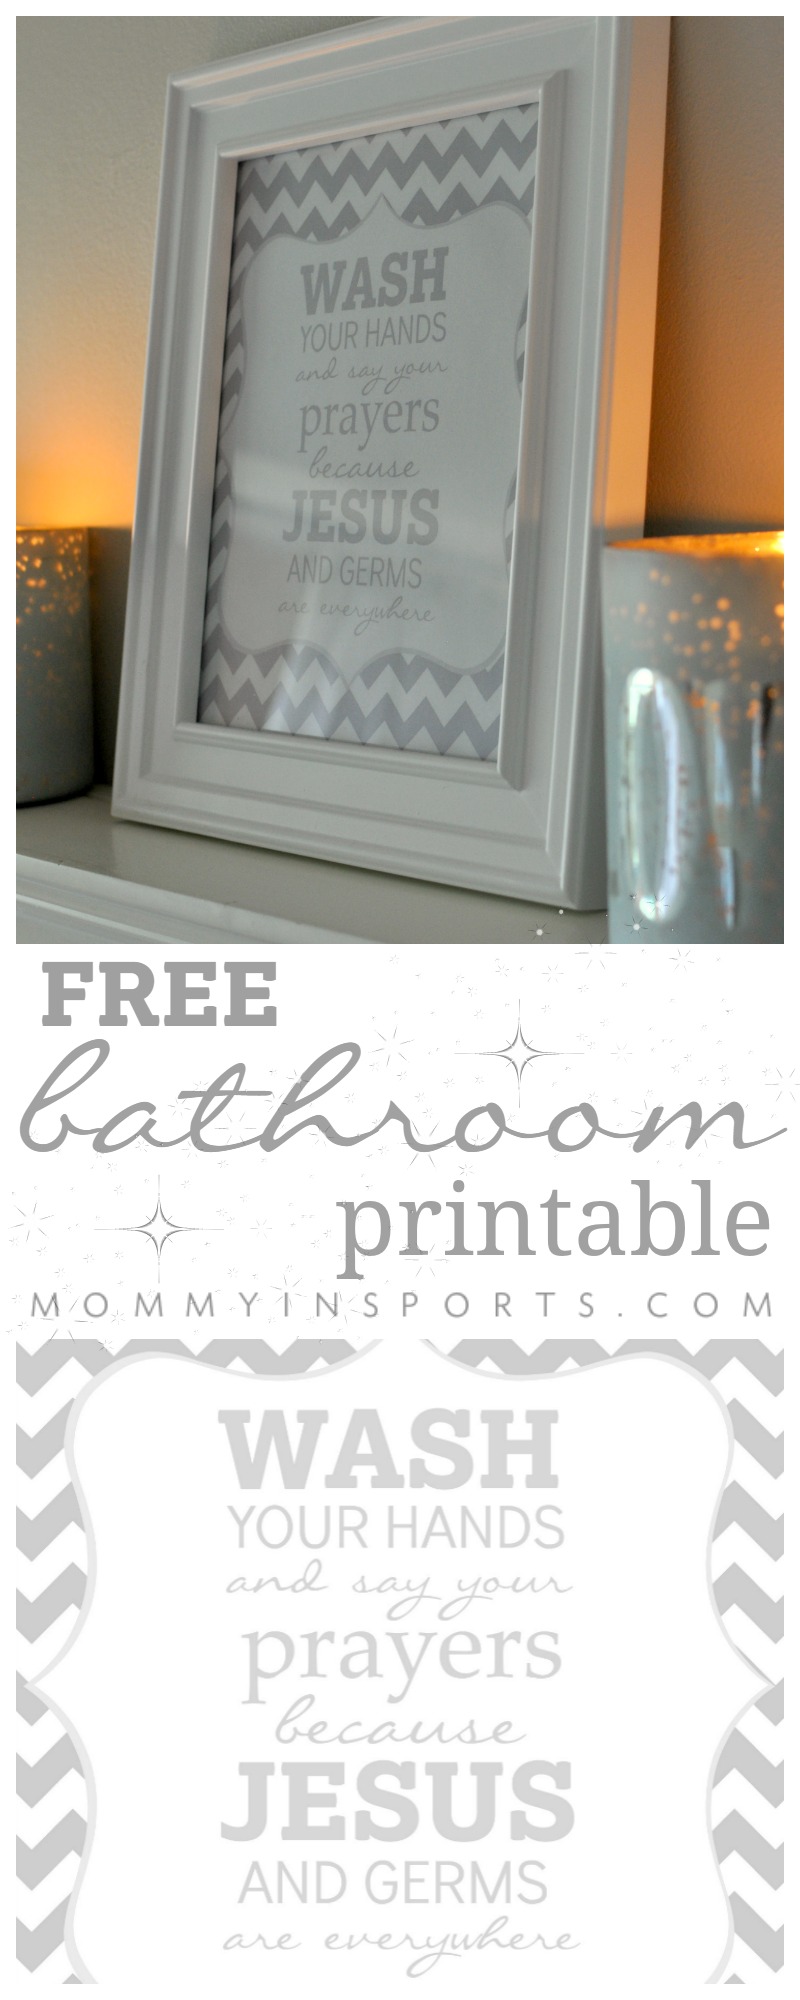 Looking for a cute printable to dress up your kids bathroom? They won't forget to wash their hands with this hanging near their sink! Print out this FREE bathroom printable now!